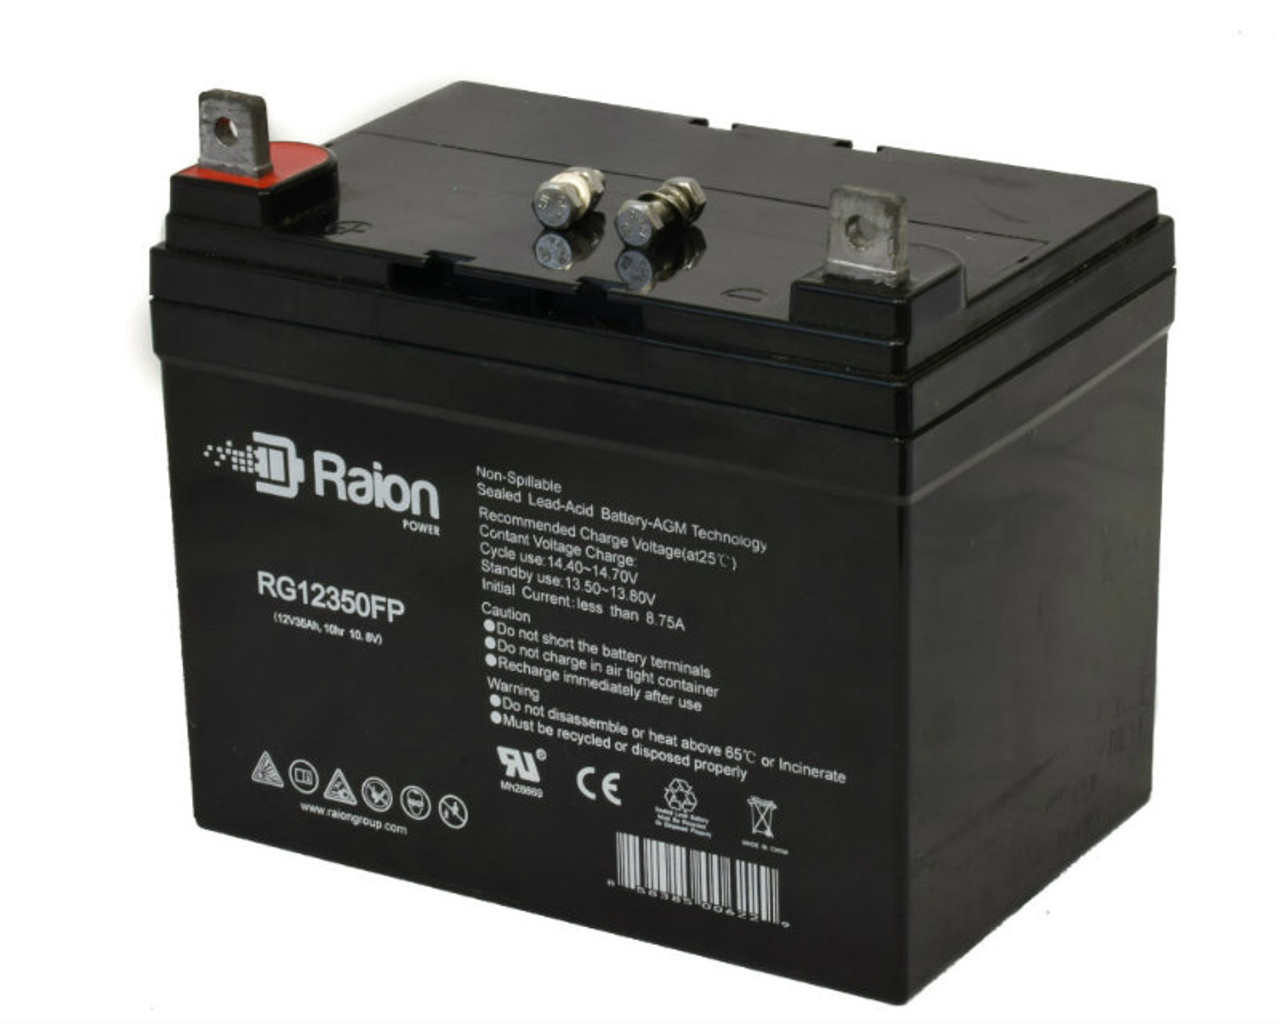 Raion Power Replacement 12V 35Ah RG12350FP Battery for Ingersol Equipment 5018